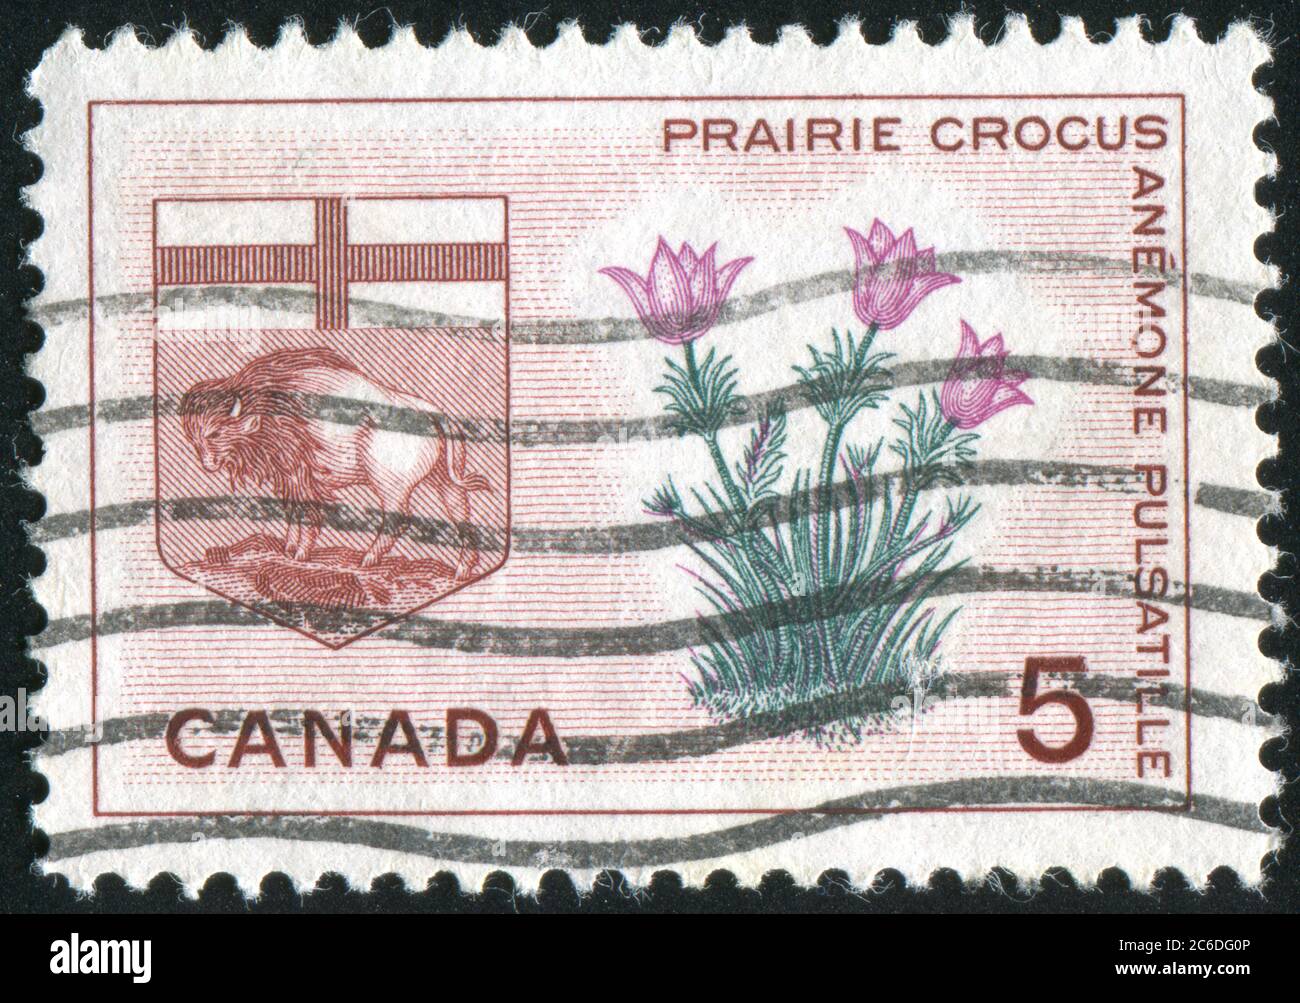 CANADA - CIRCA 1965: stamp printed by Canada, shows Prairie crocus and arms of Manitoba, circa 1965 Stock Photo